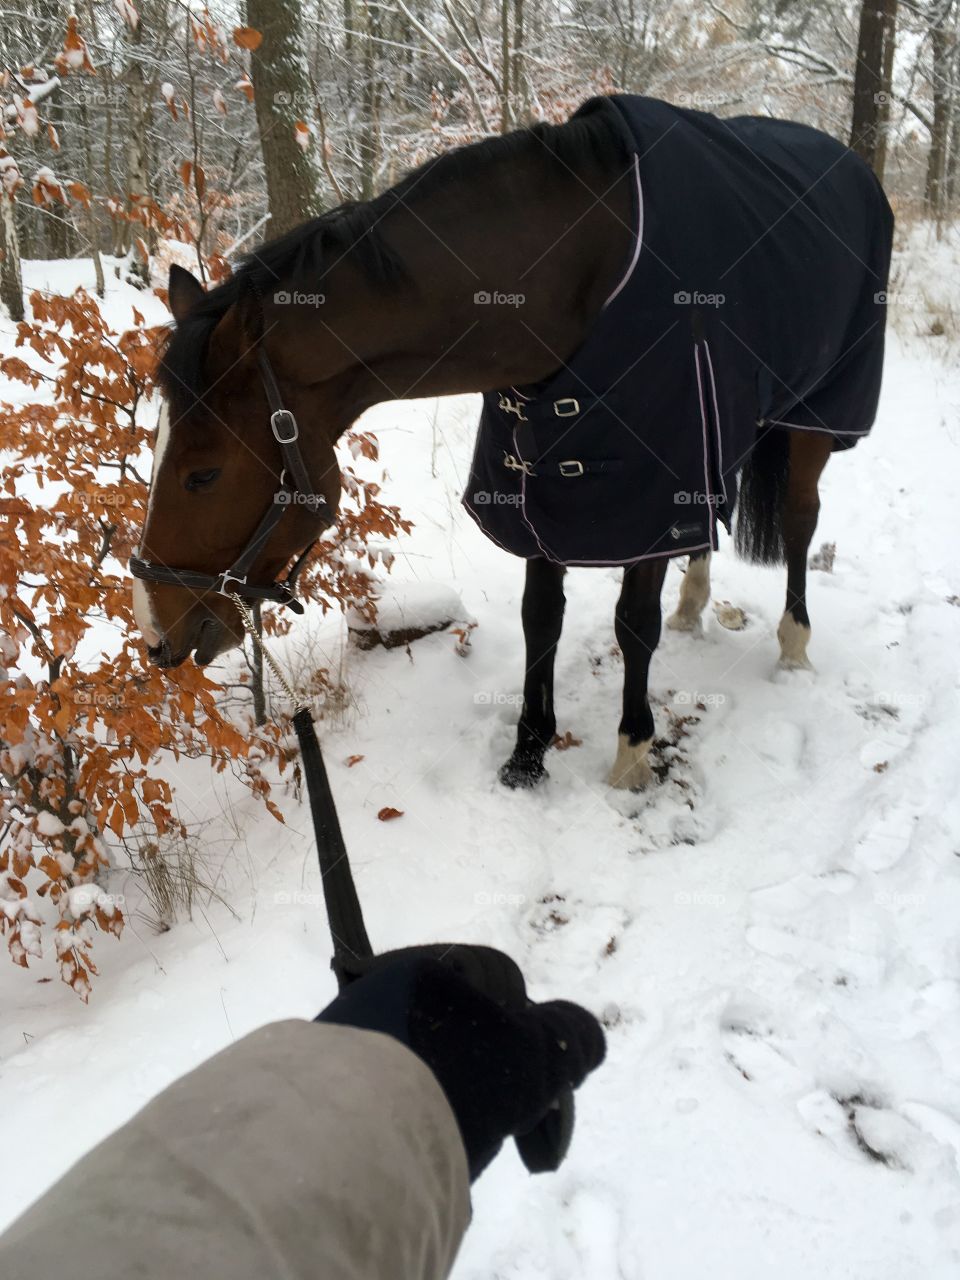 Horse that rather wants to eat than take a walk in snowy landscape